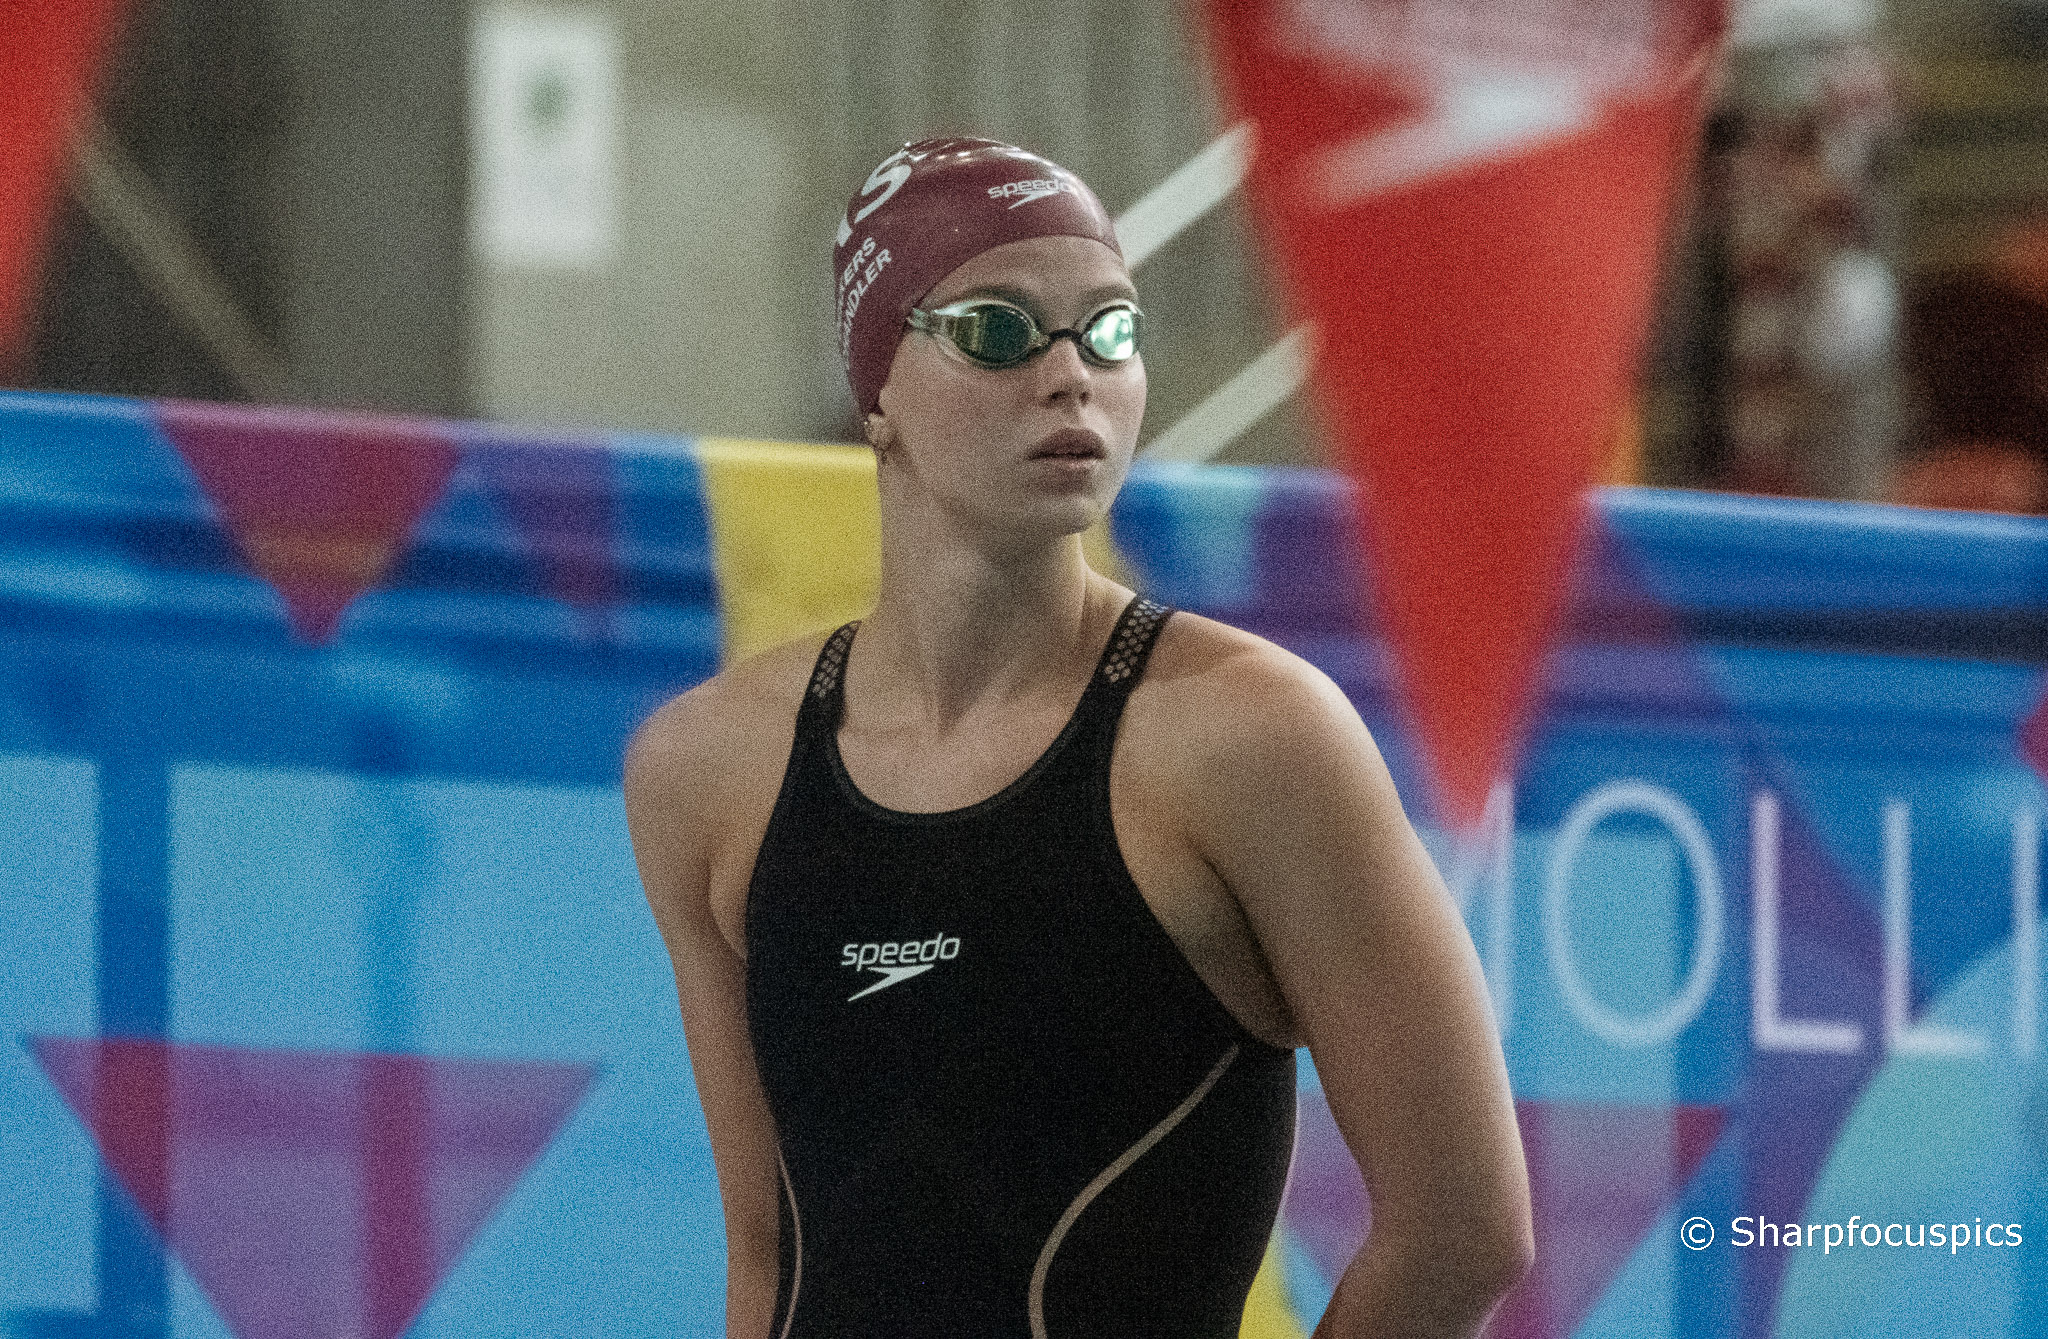 Elizabeth Dekkers, World Championships Medalist, Sets New All Comers Record in 200 Fly with a Time of 2:05.20